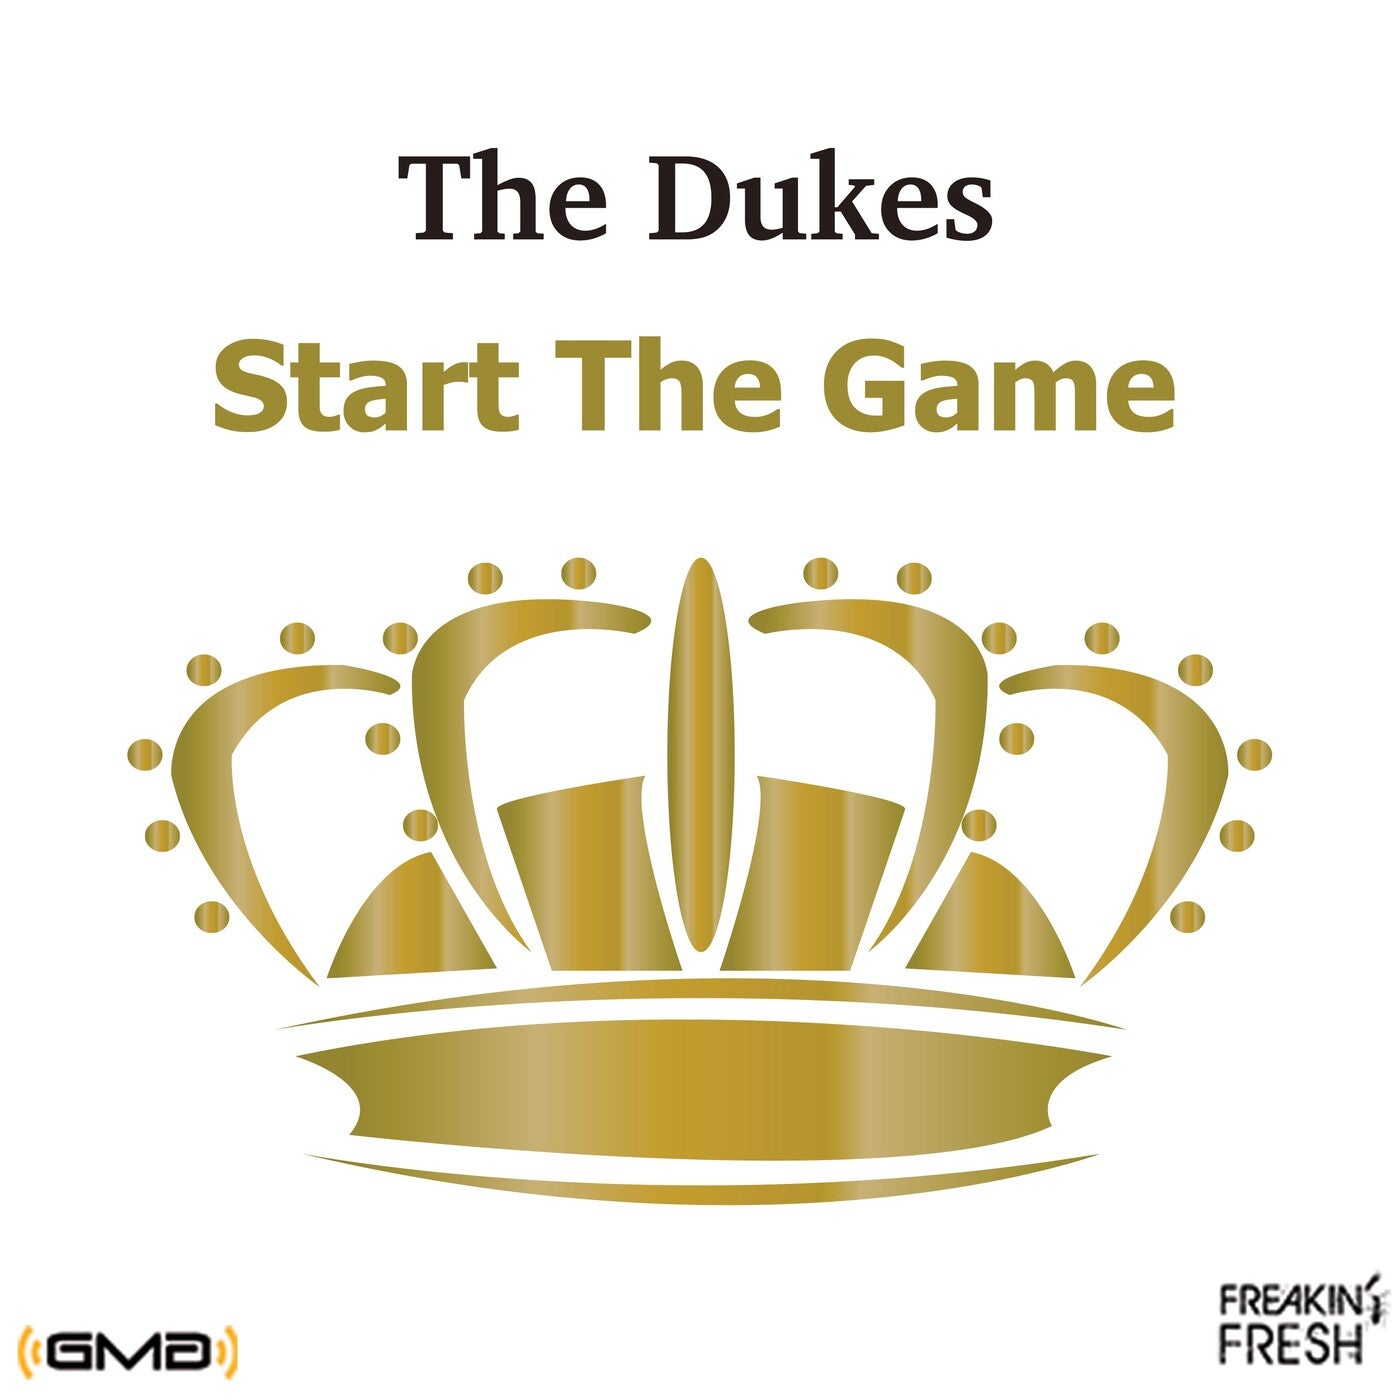 Start the Game